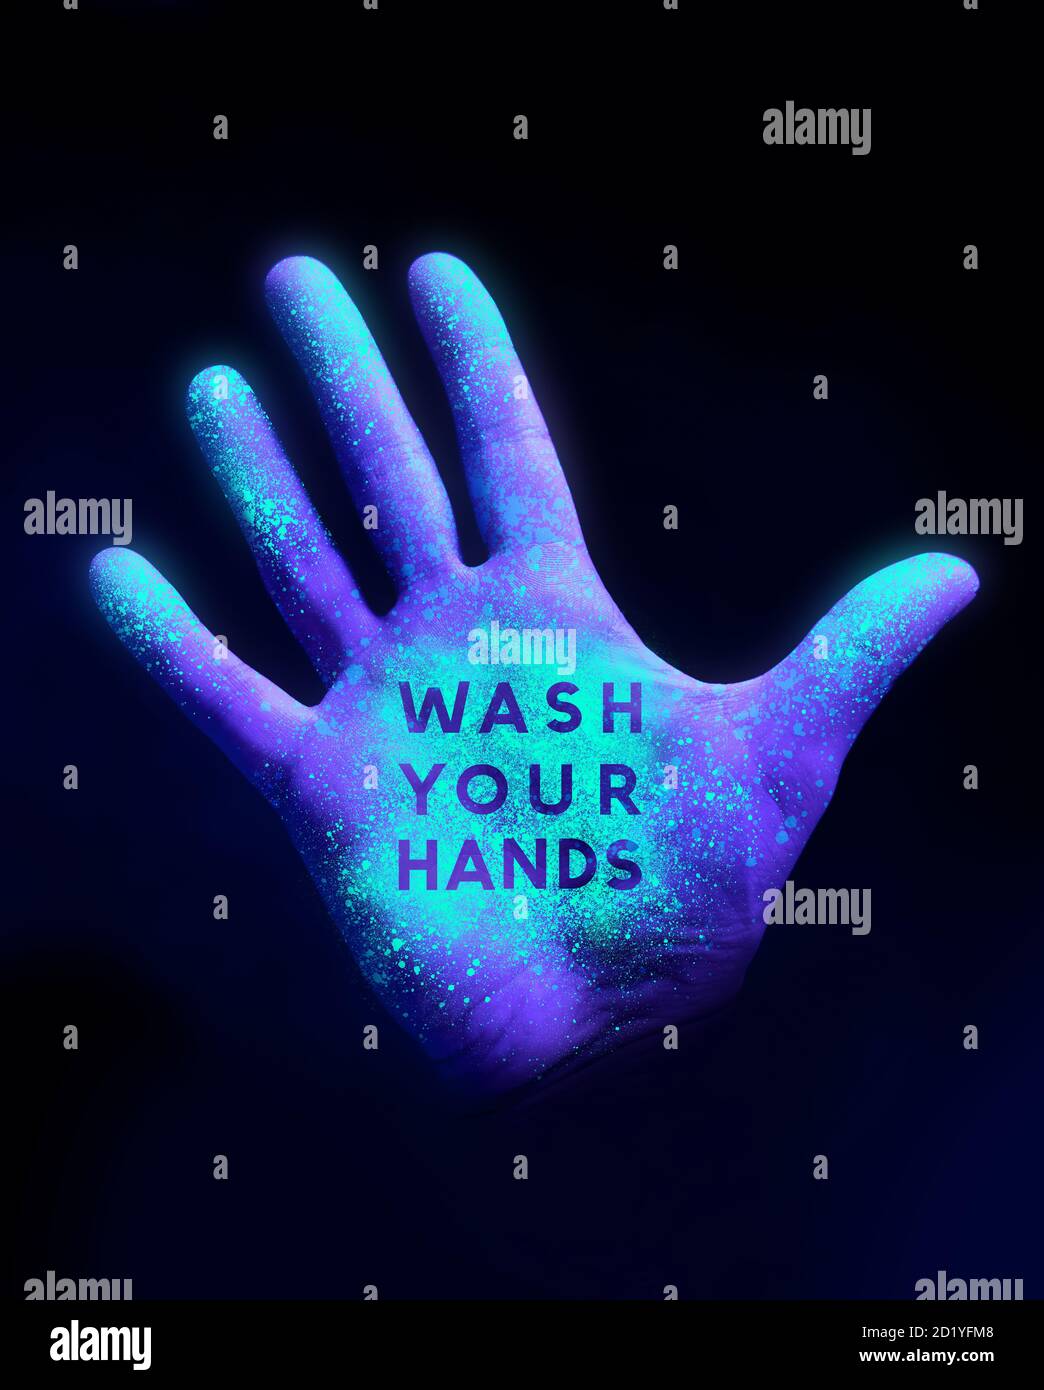 Stop the spread of desease. A human hand glowing from UV ultra violet light showing bacteria and viruses. wash your hands Concept. Stock Photo